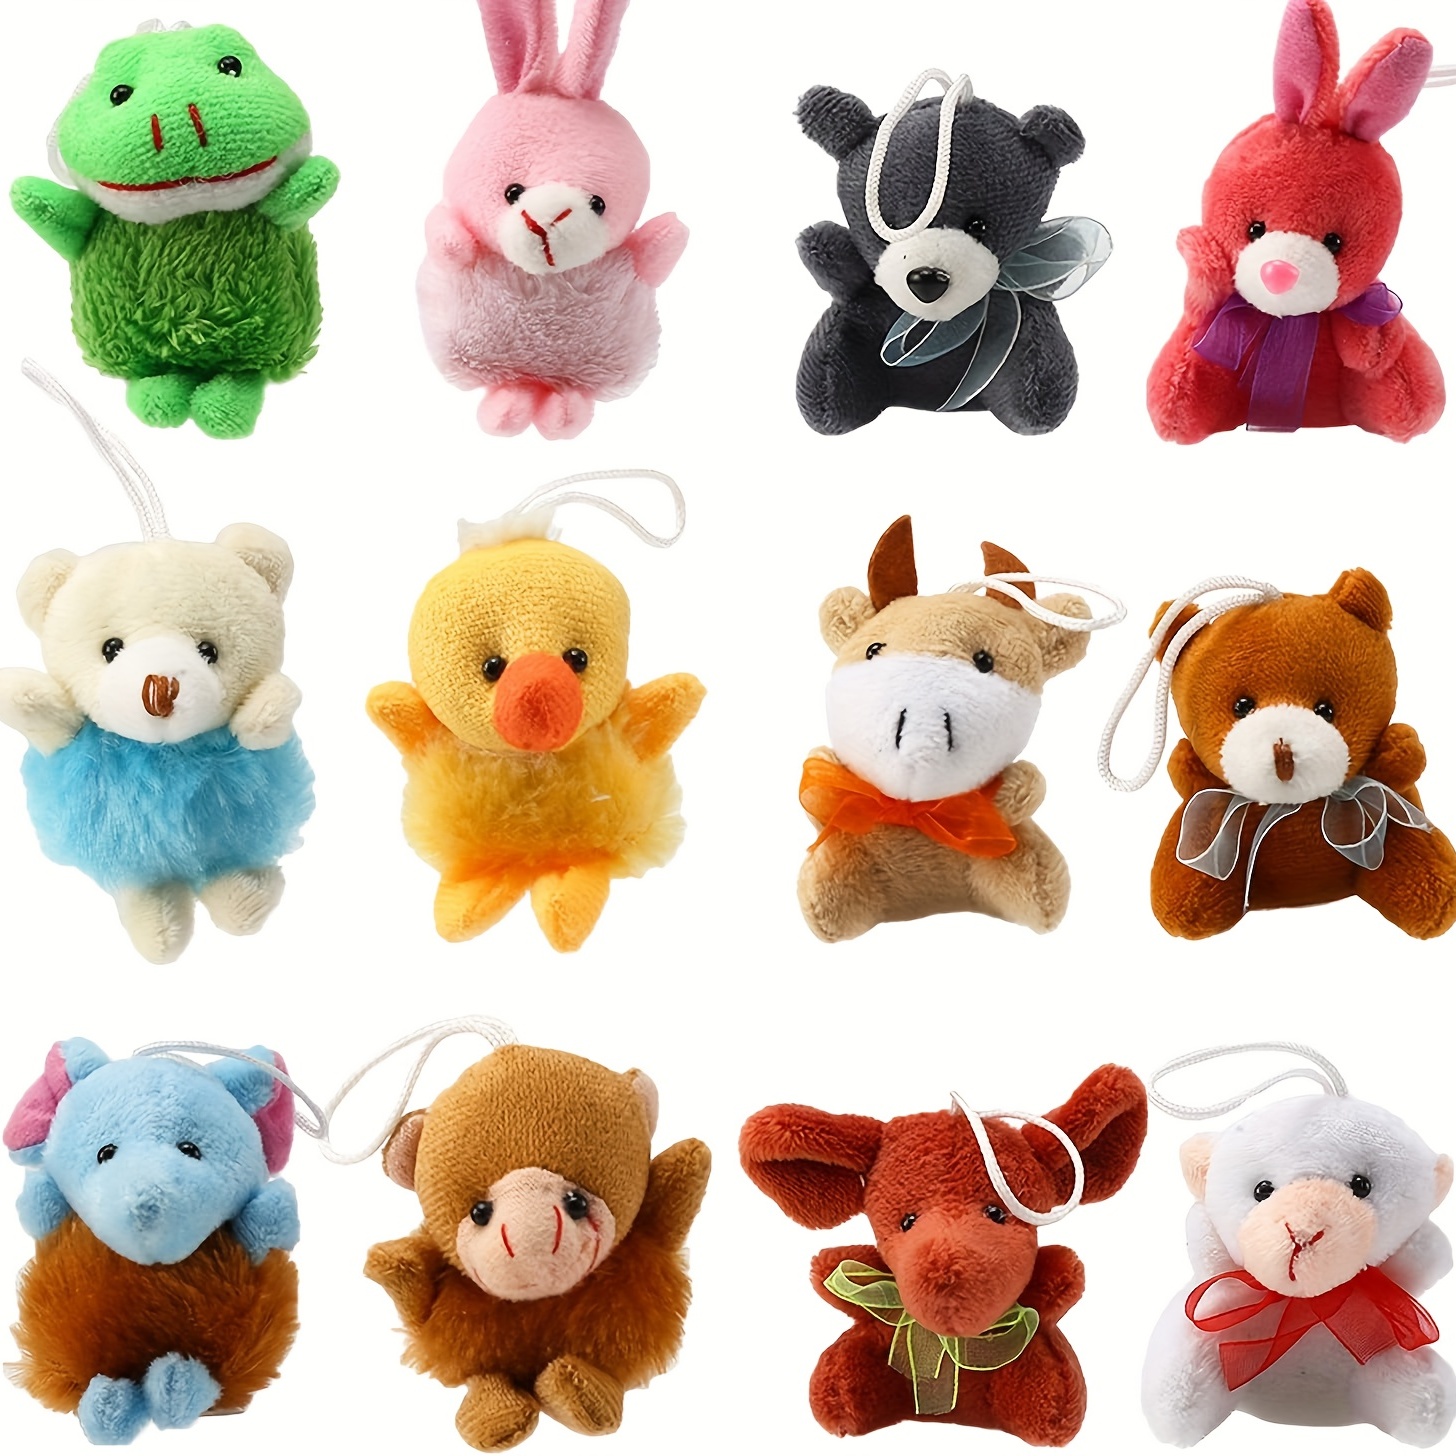 16-Pack Mini Animal Plush Toy Set, Soft Plush Toys for Kids Party Favors,  Keychain Ornament,Birthday Party Supplies,Prize Rewards